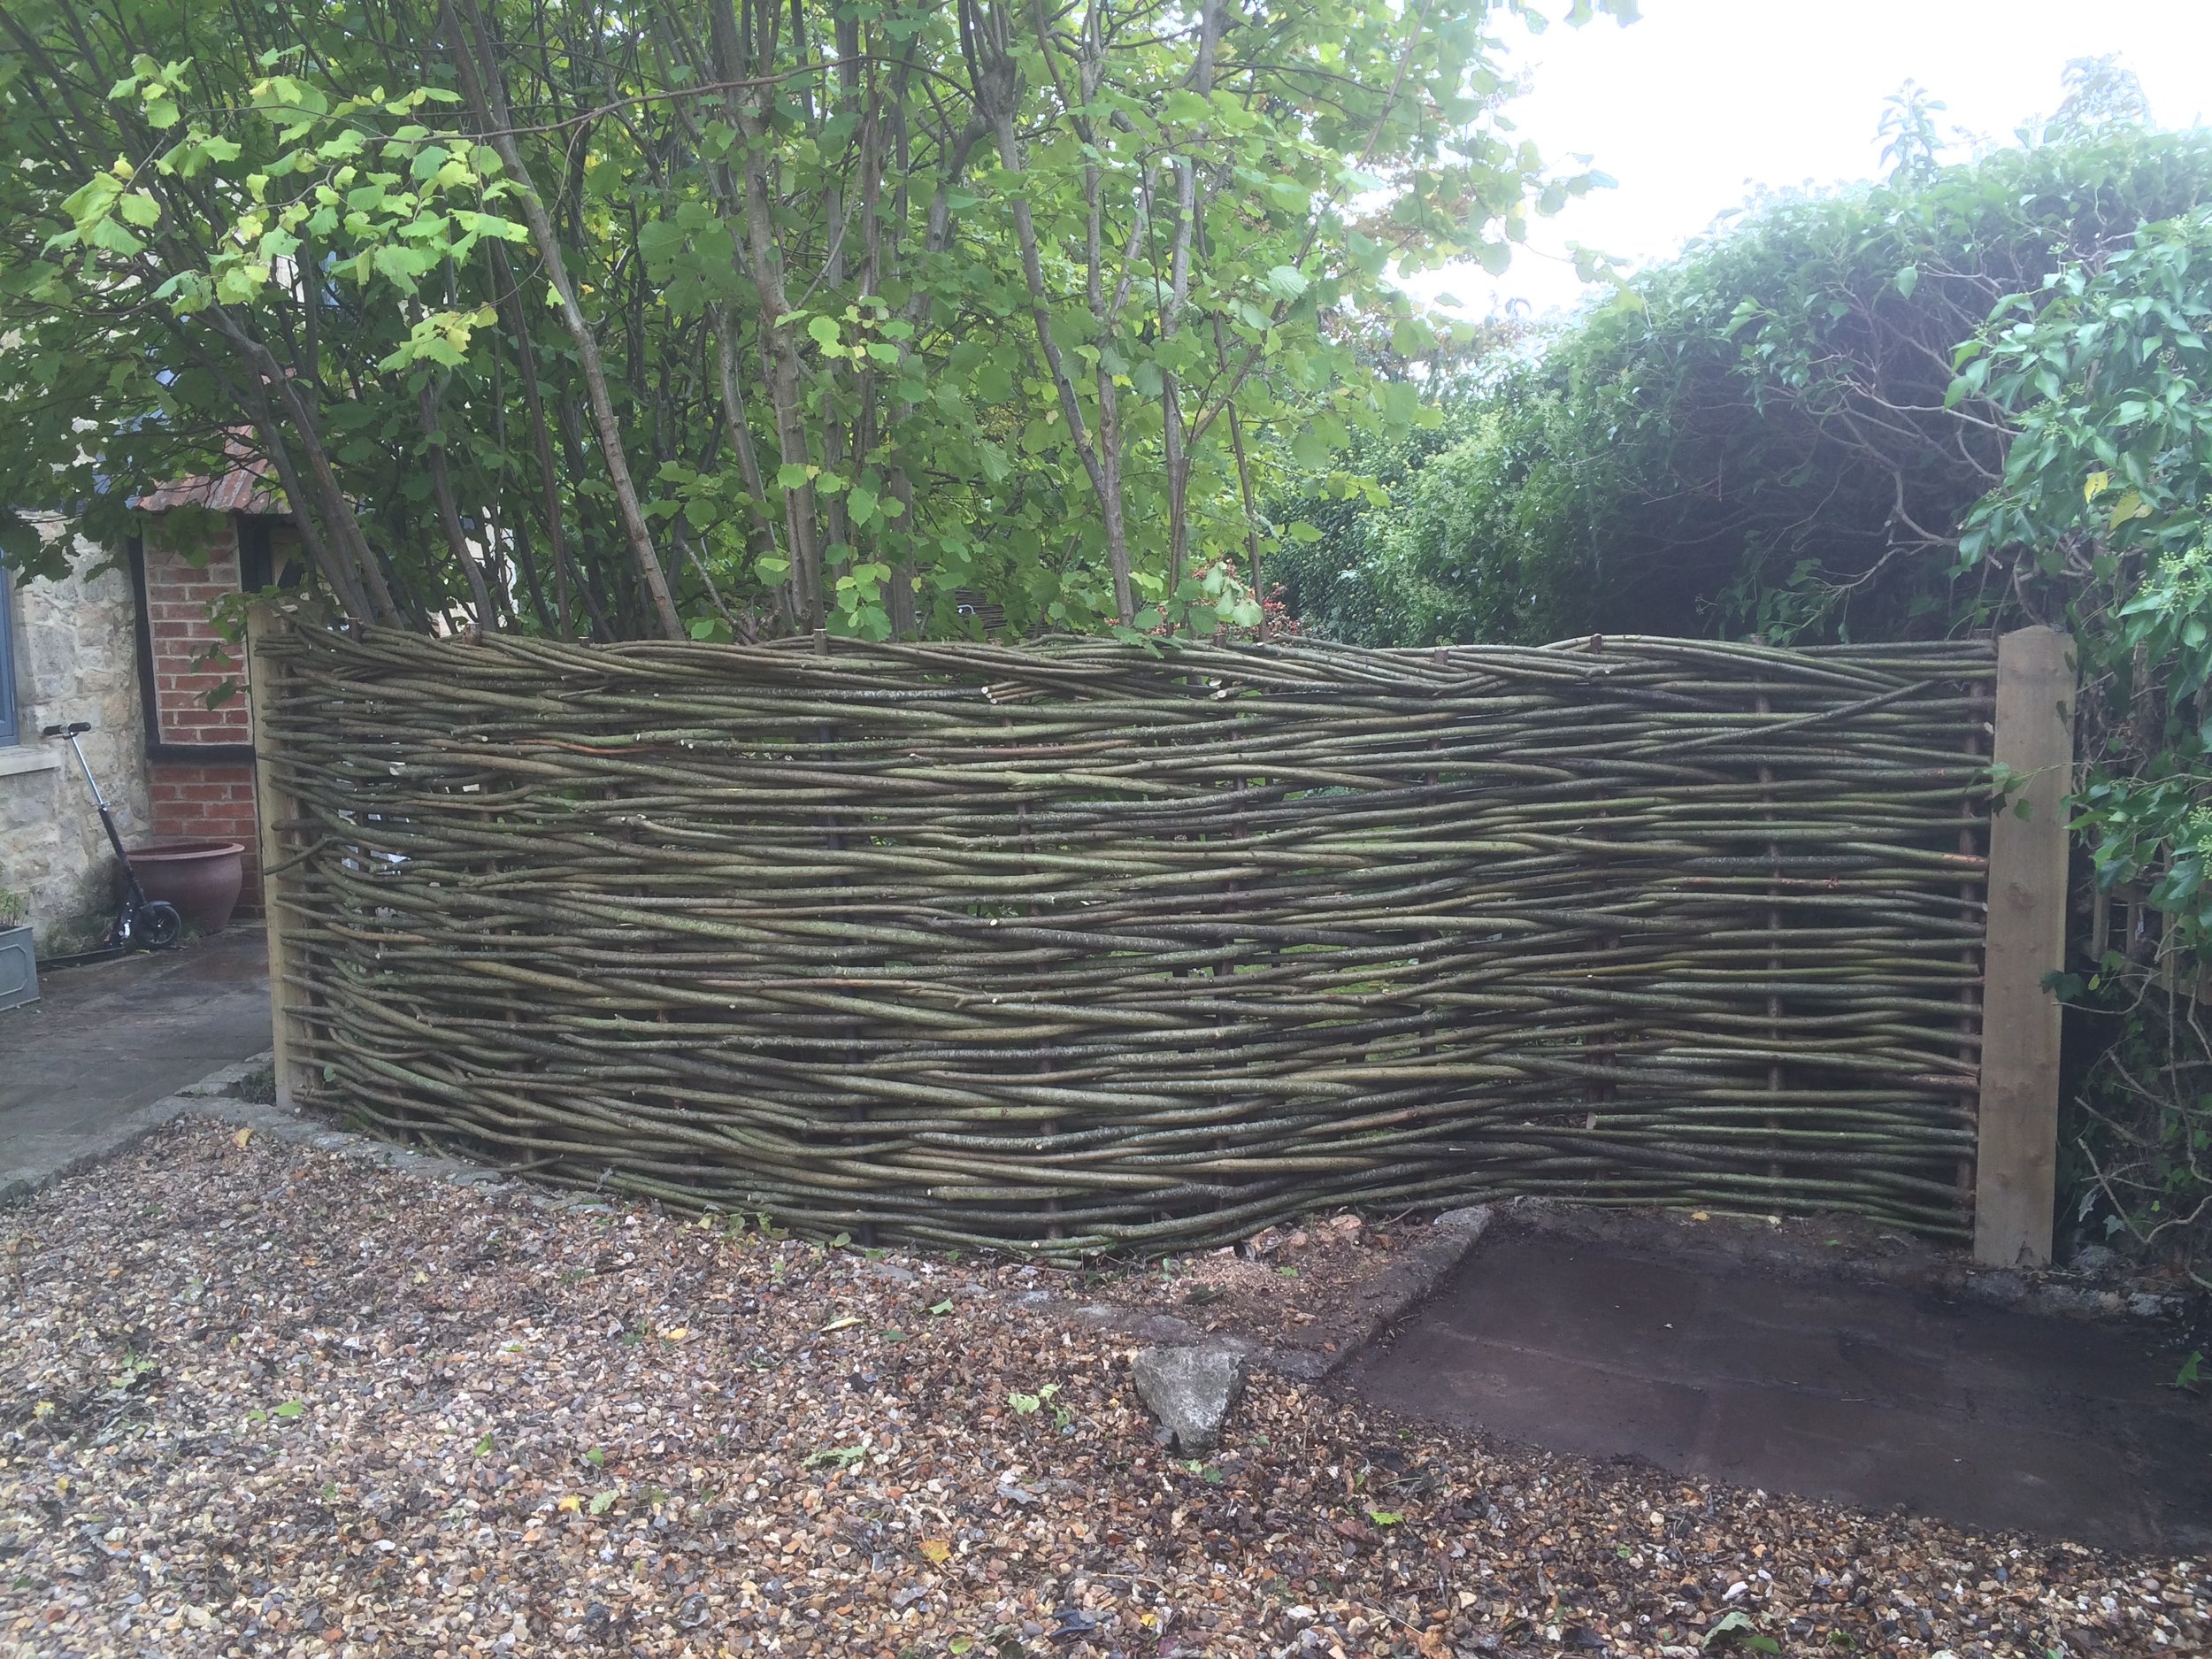 Simple woven natural fence